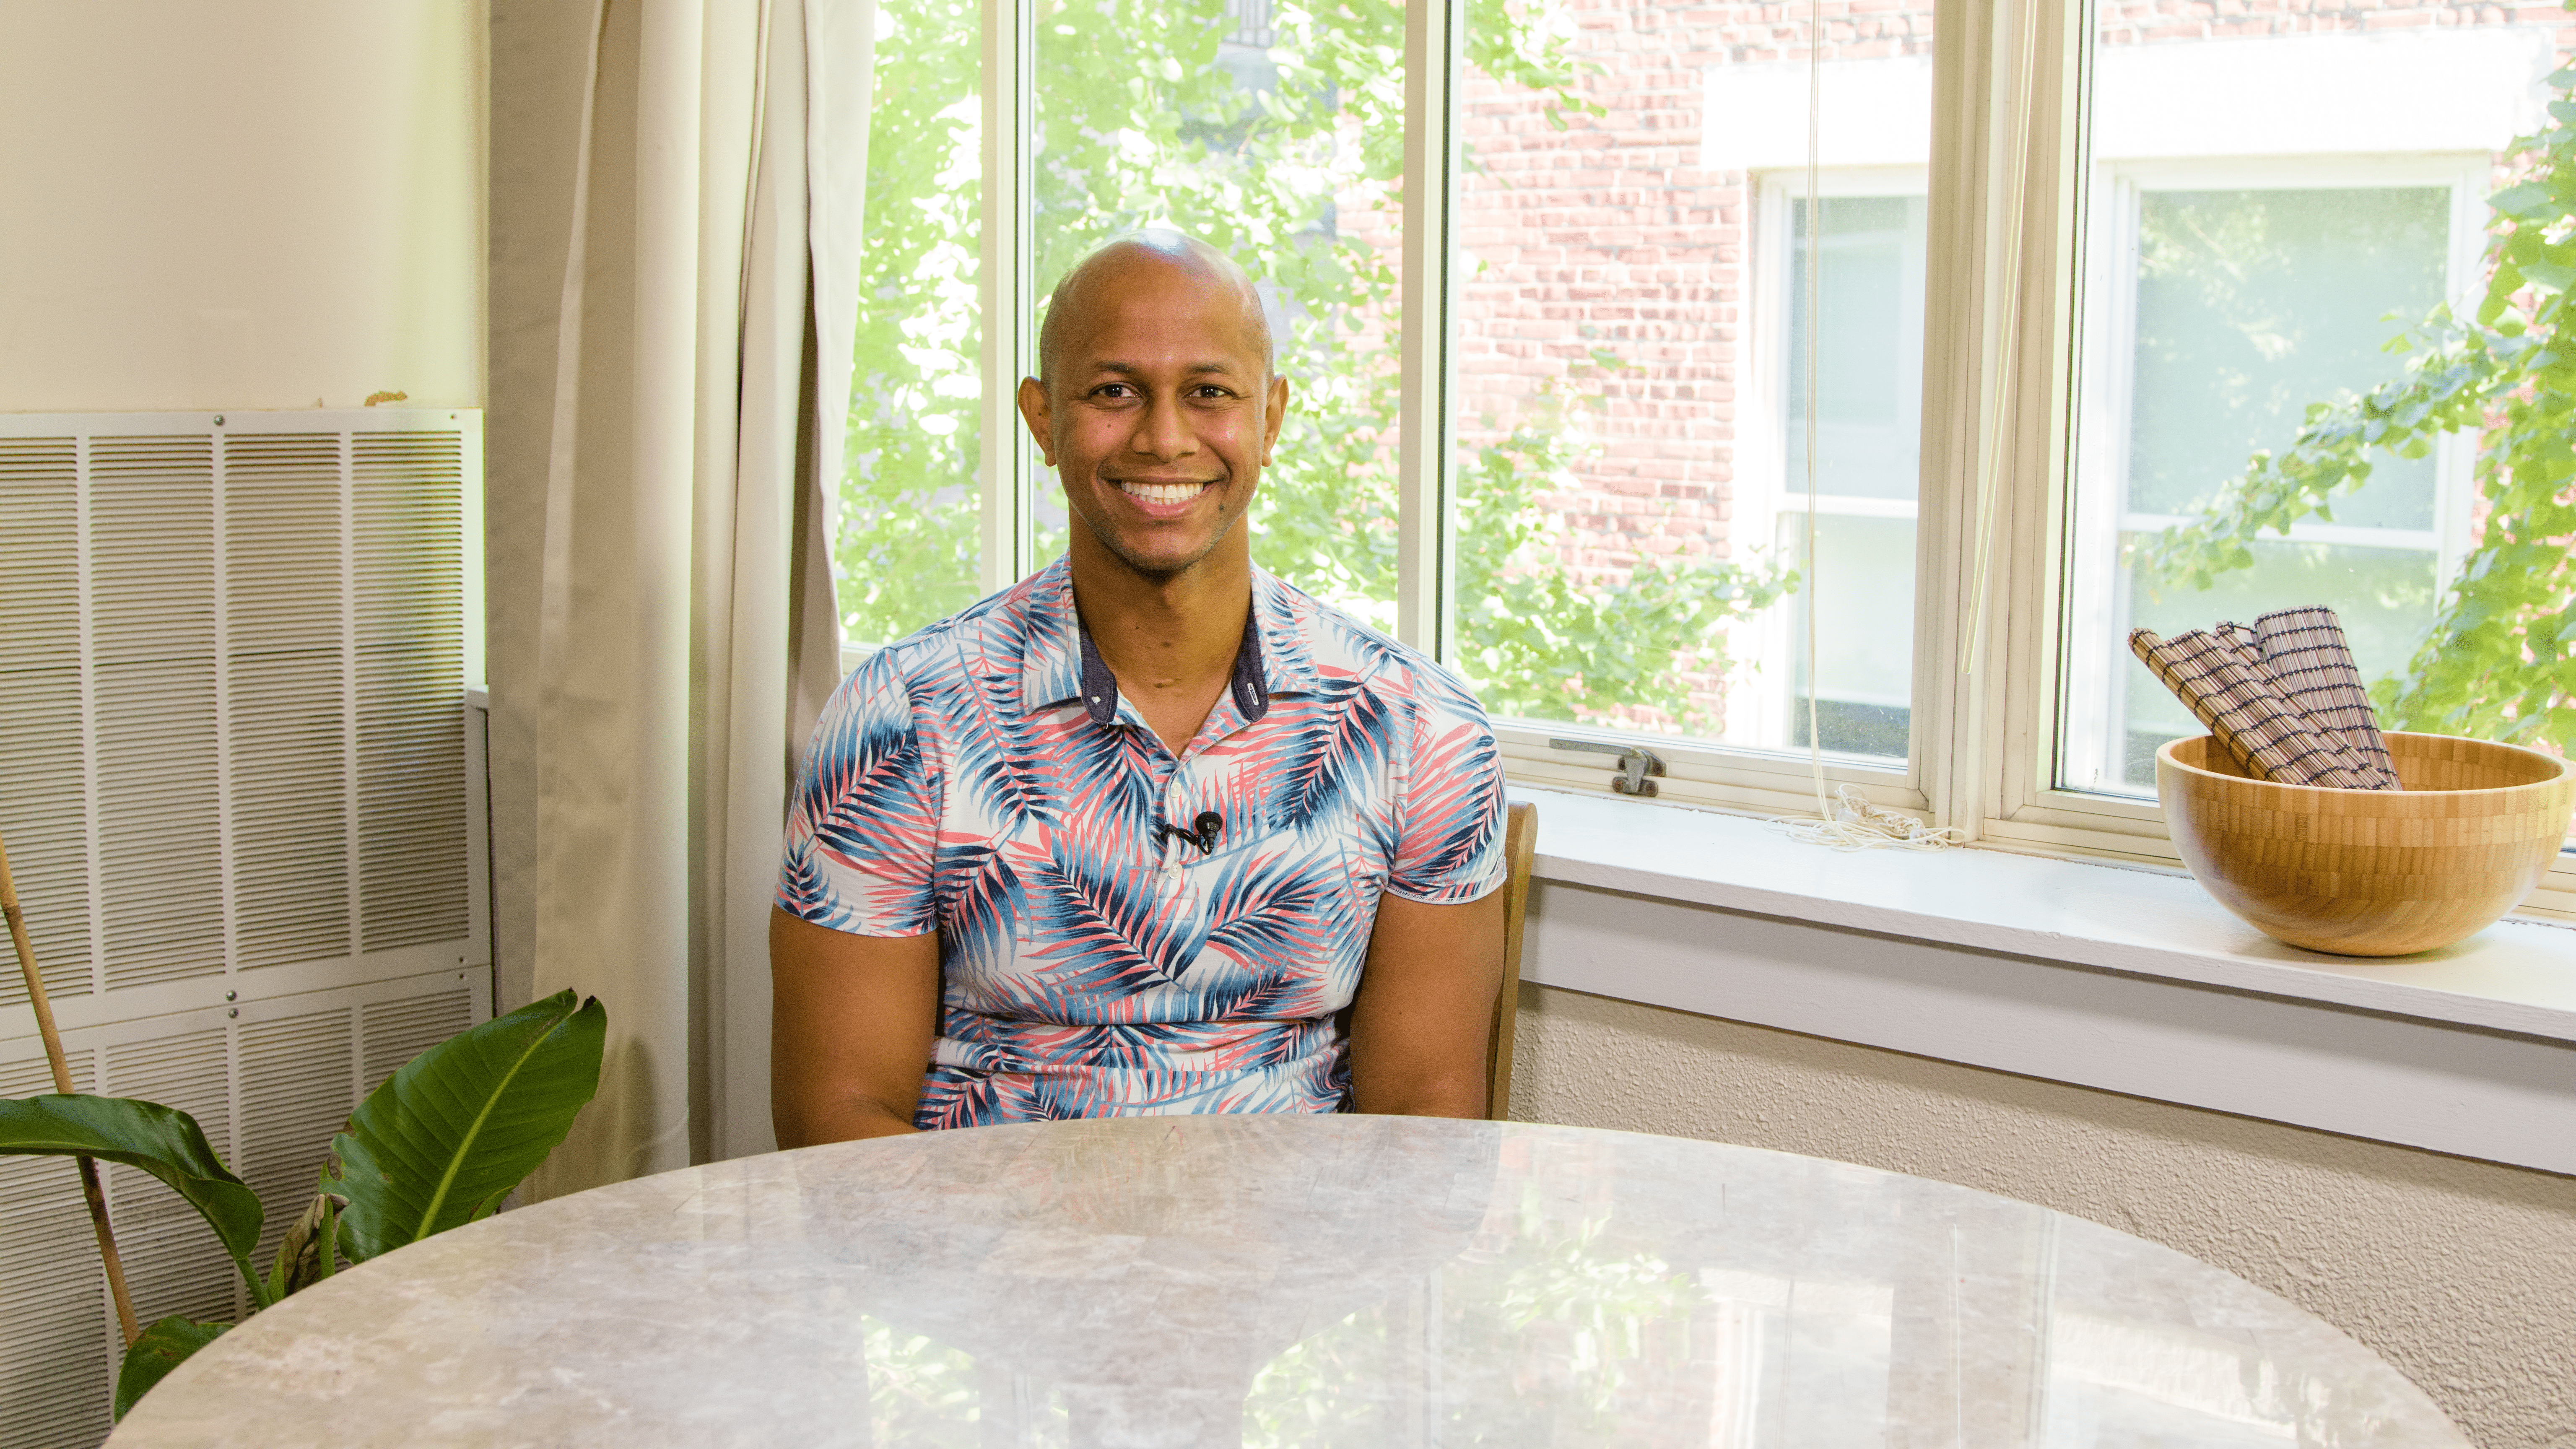 Despite Homophobia and Bullying, Gay Haitian Comes Out and Learns Strength and Patience. “We Have to Have That Patience to Teach Them How to Love Us.”